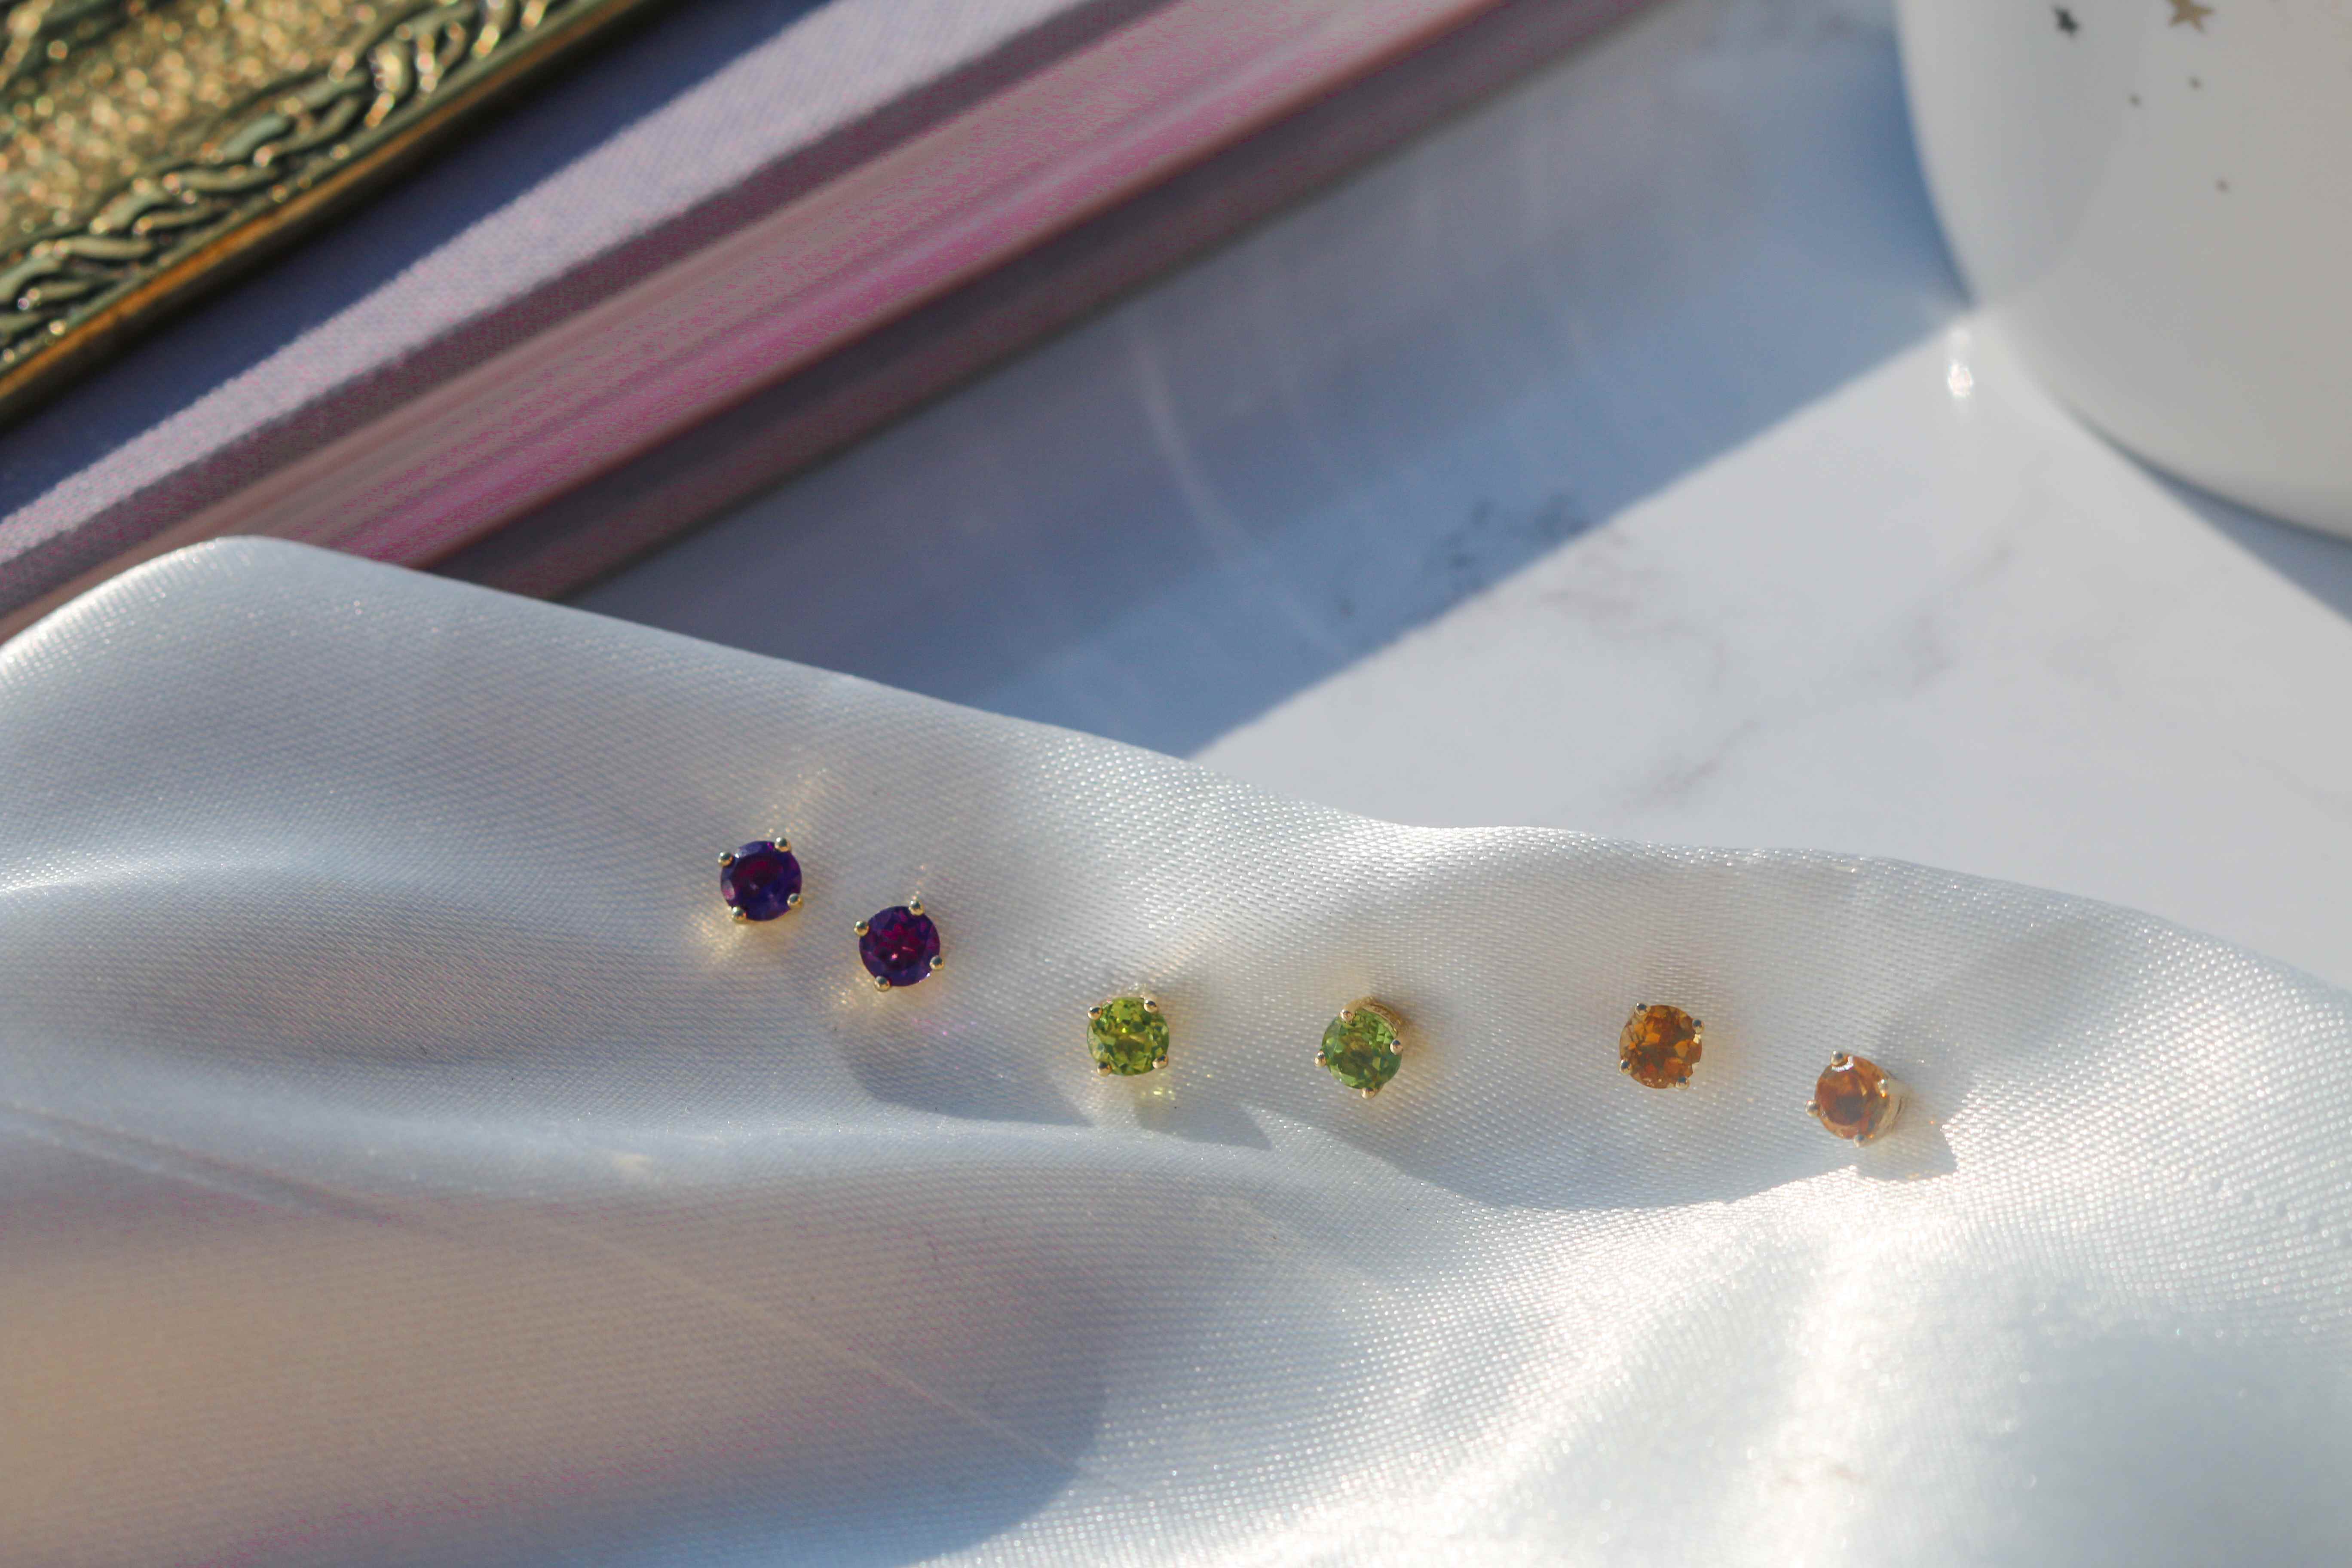 Image shows a selection of gold birthstone earrings